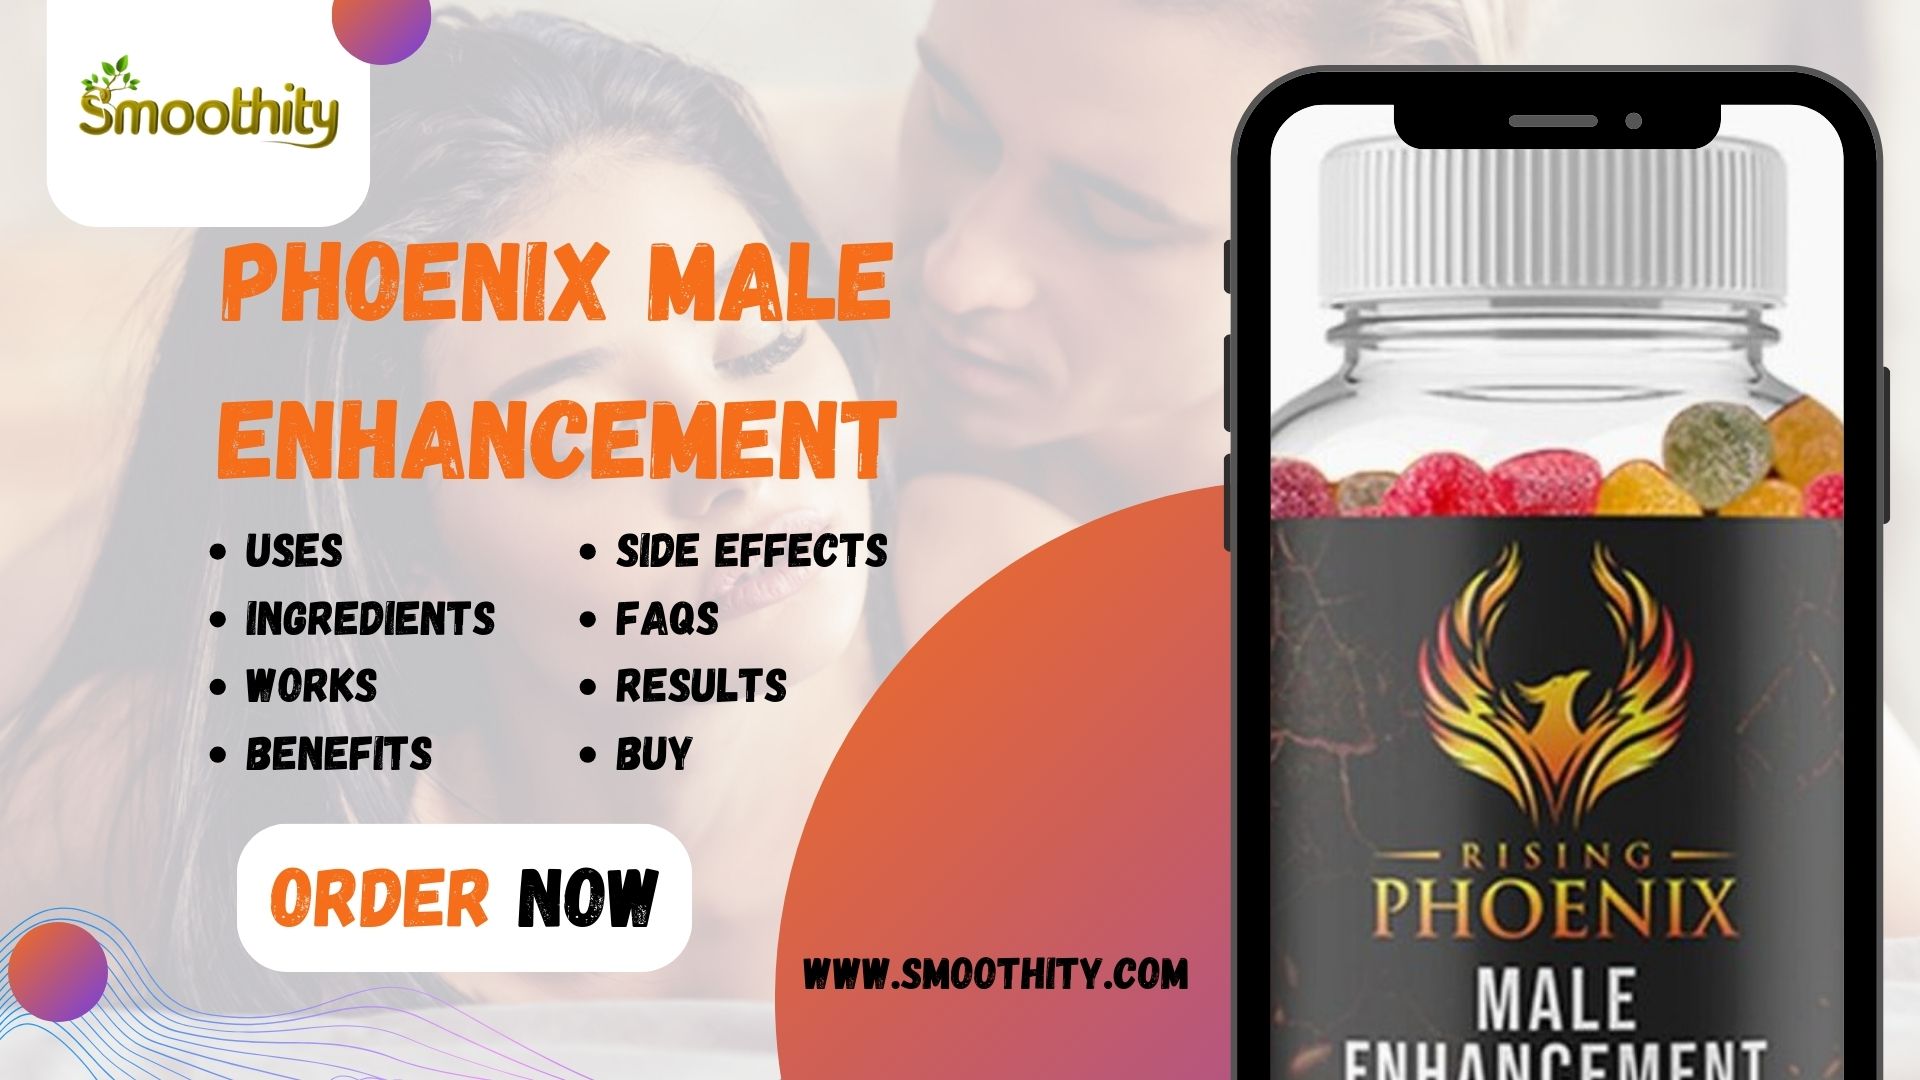 How to Use the Phoenix Male Enhancement